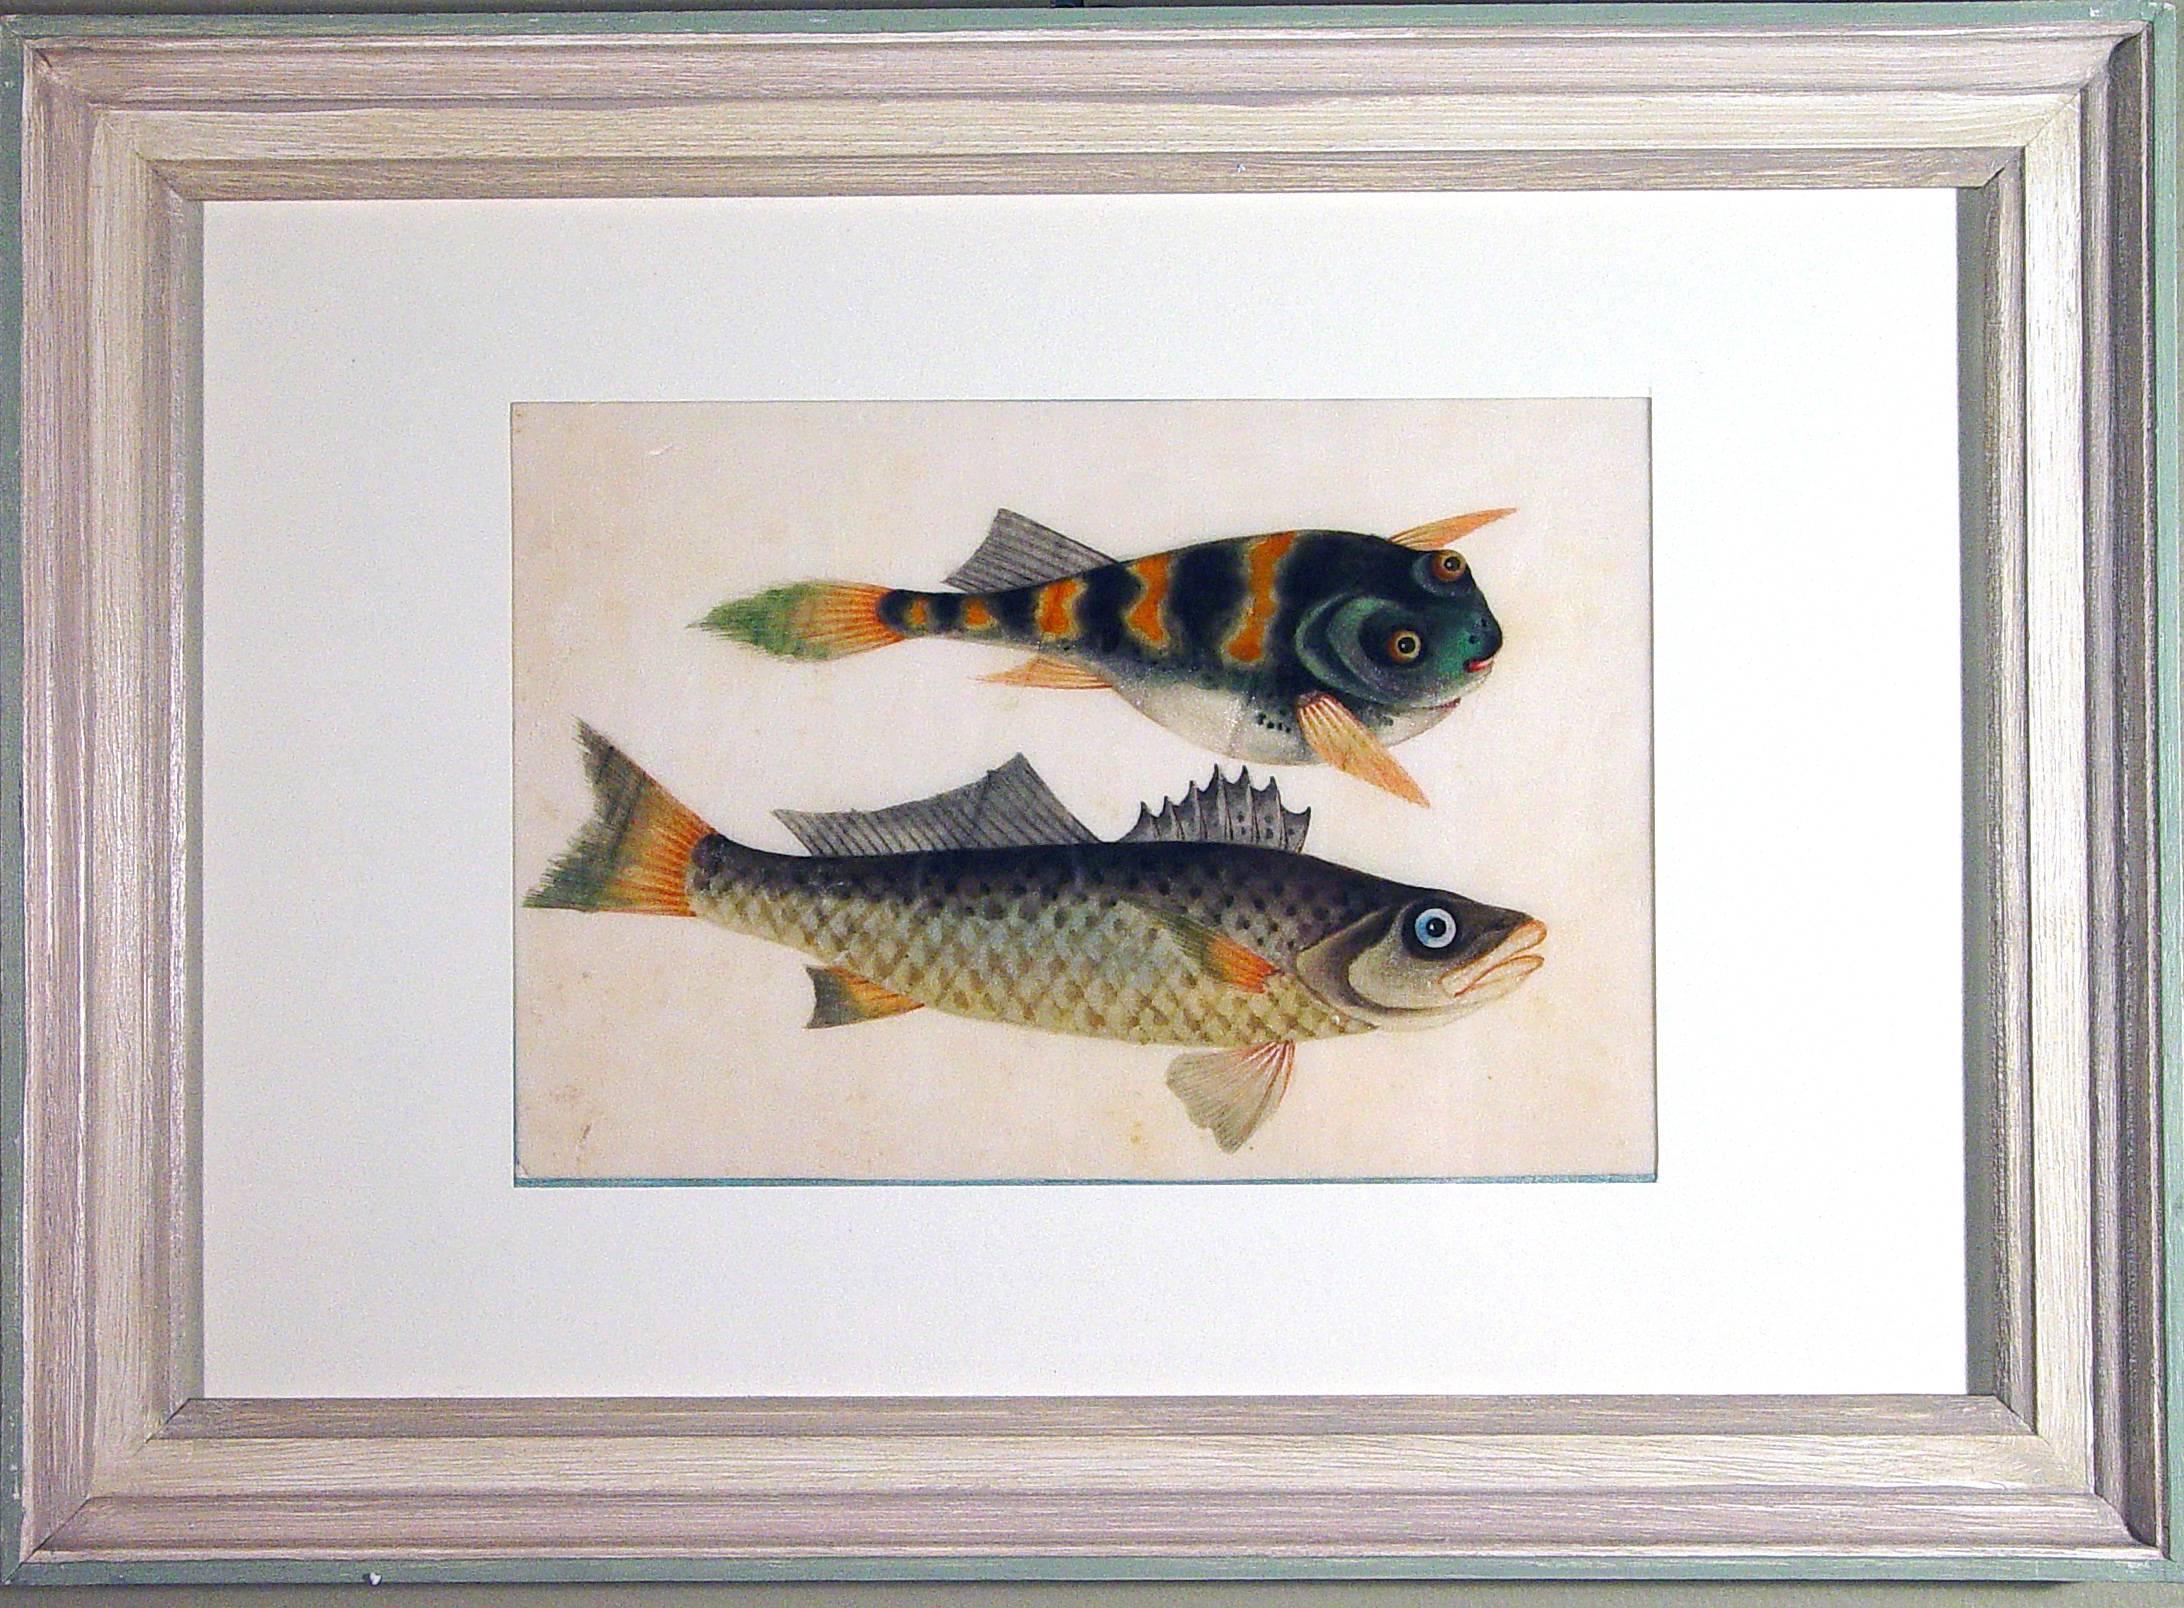 China Trade watercolors of fish on pith paper,
circa 1850


The Chinese watercolor paintings are on pith paper mounted in a contemporary bleached wood frame.

Dimensions: 11/2 inches x 16 inches.